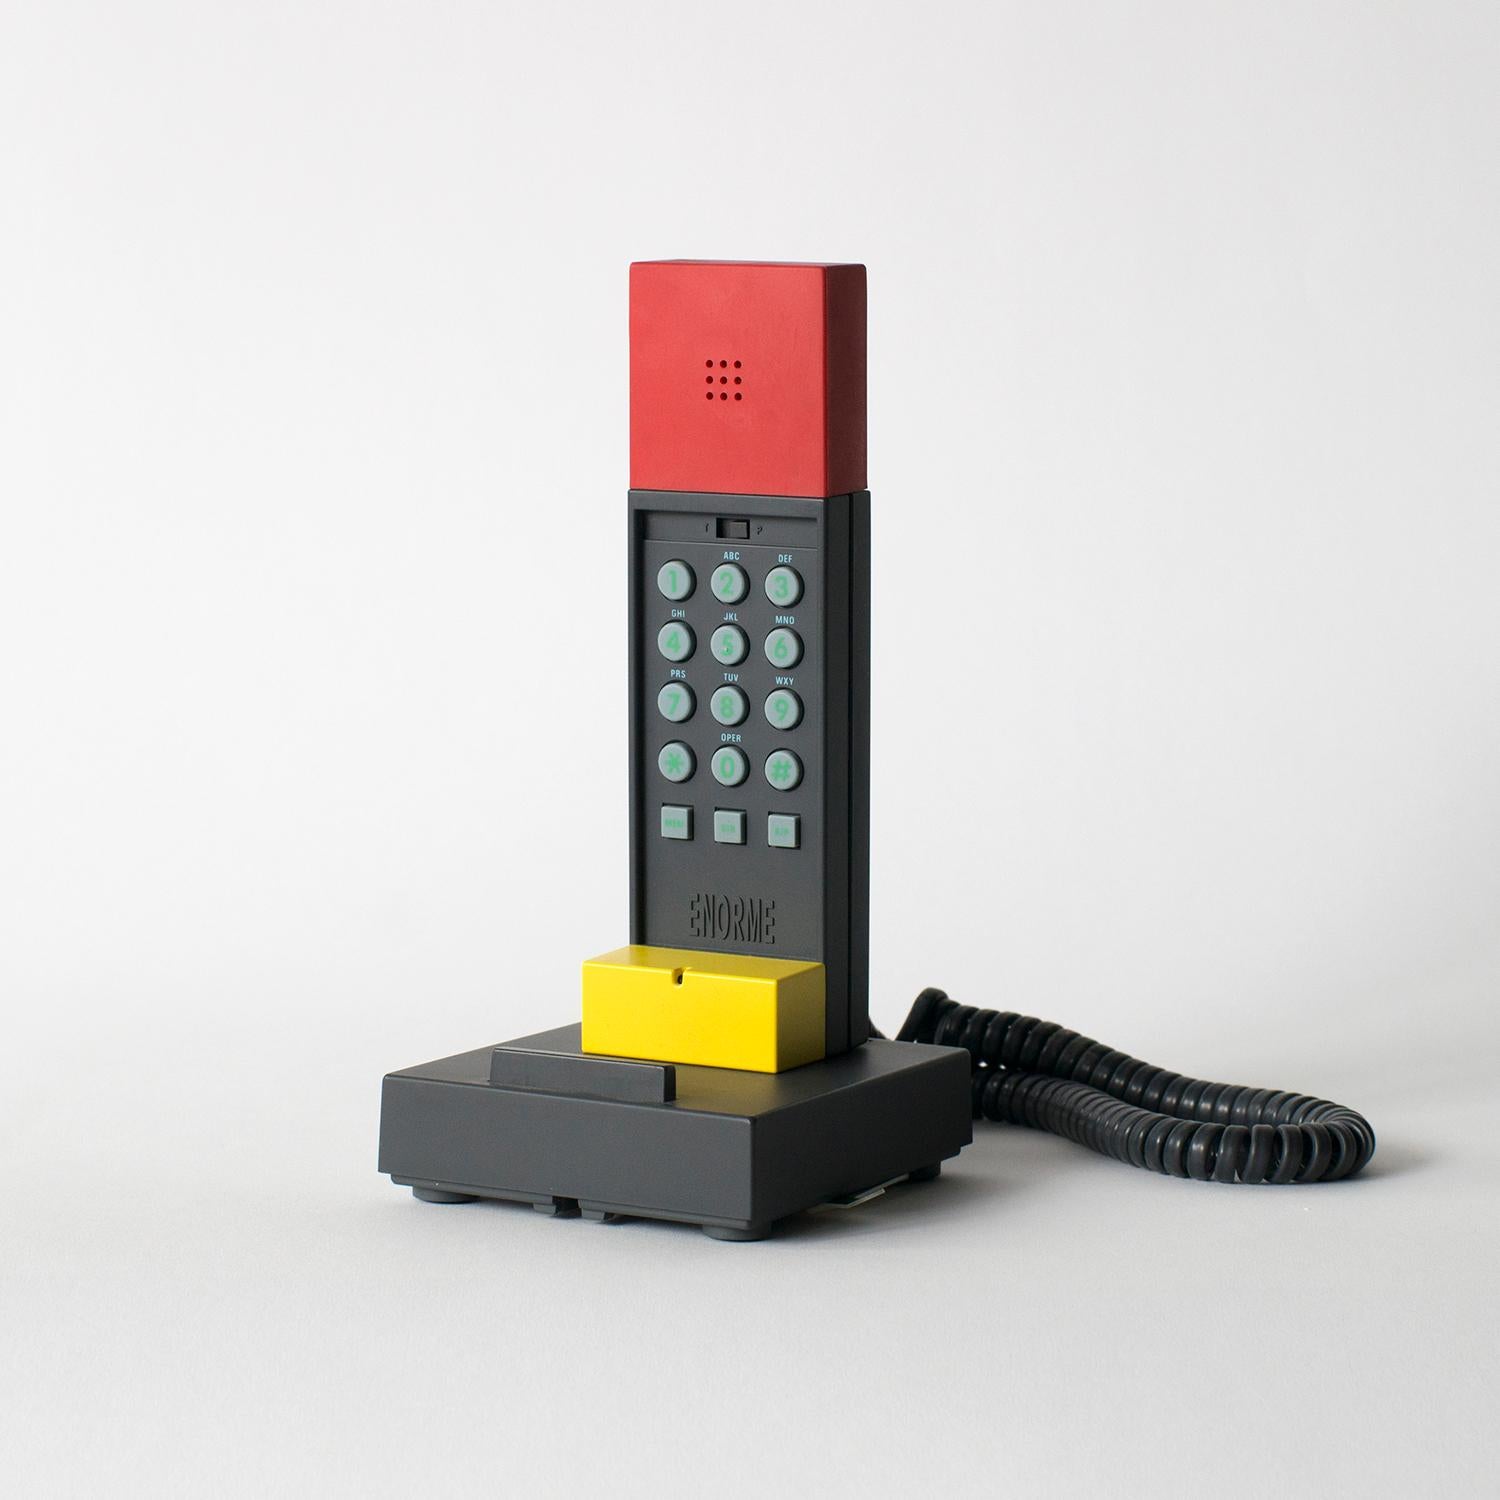 Painted Enorme Telephone Ettore Sottsass Postmodern